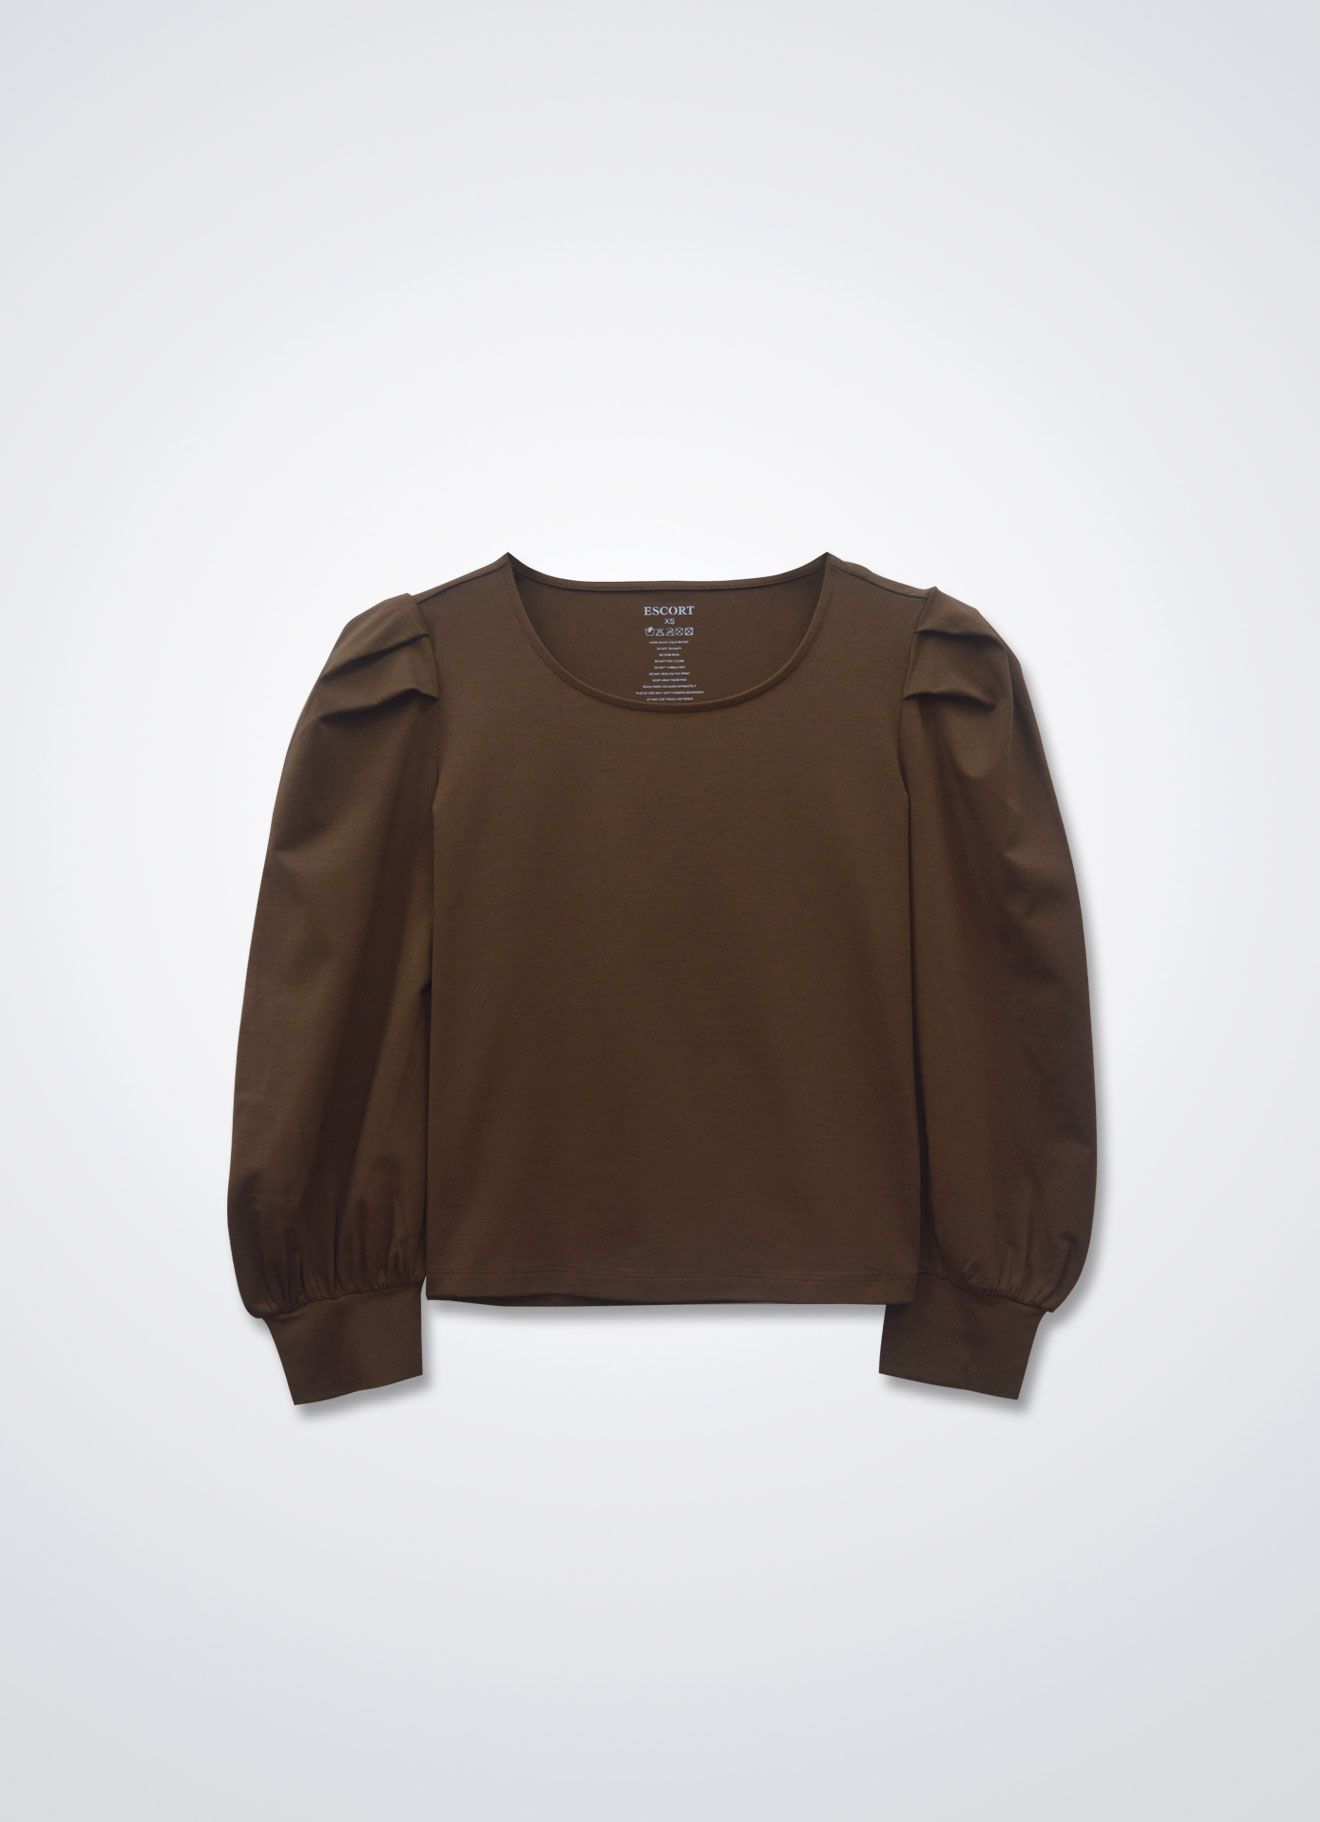 Bison by Long Sleeve Top